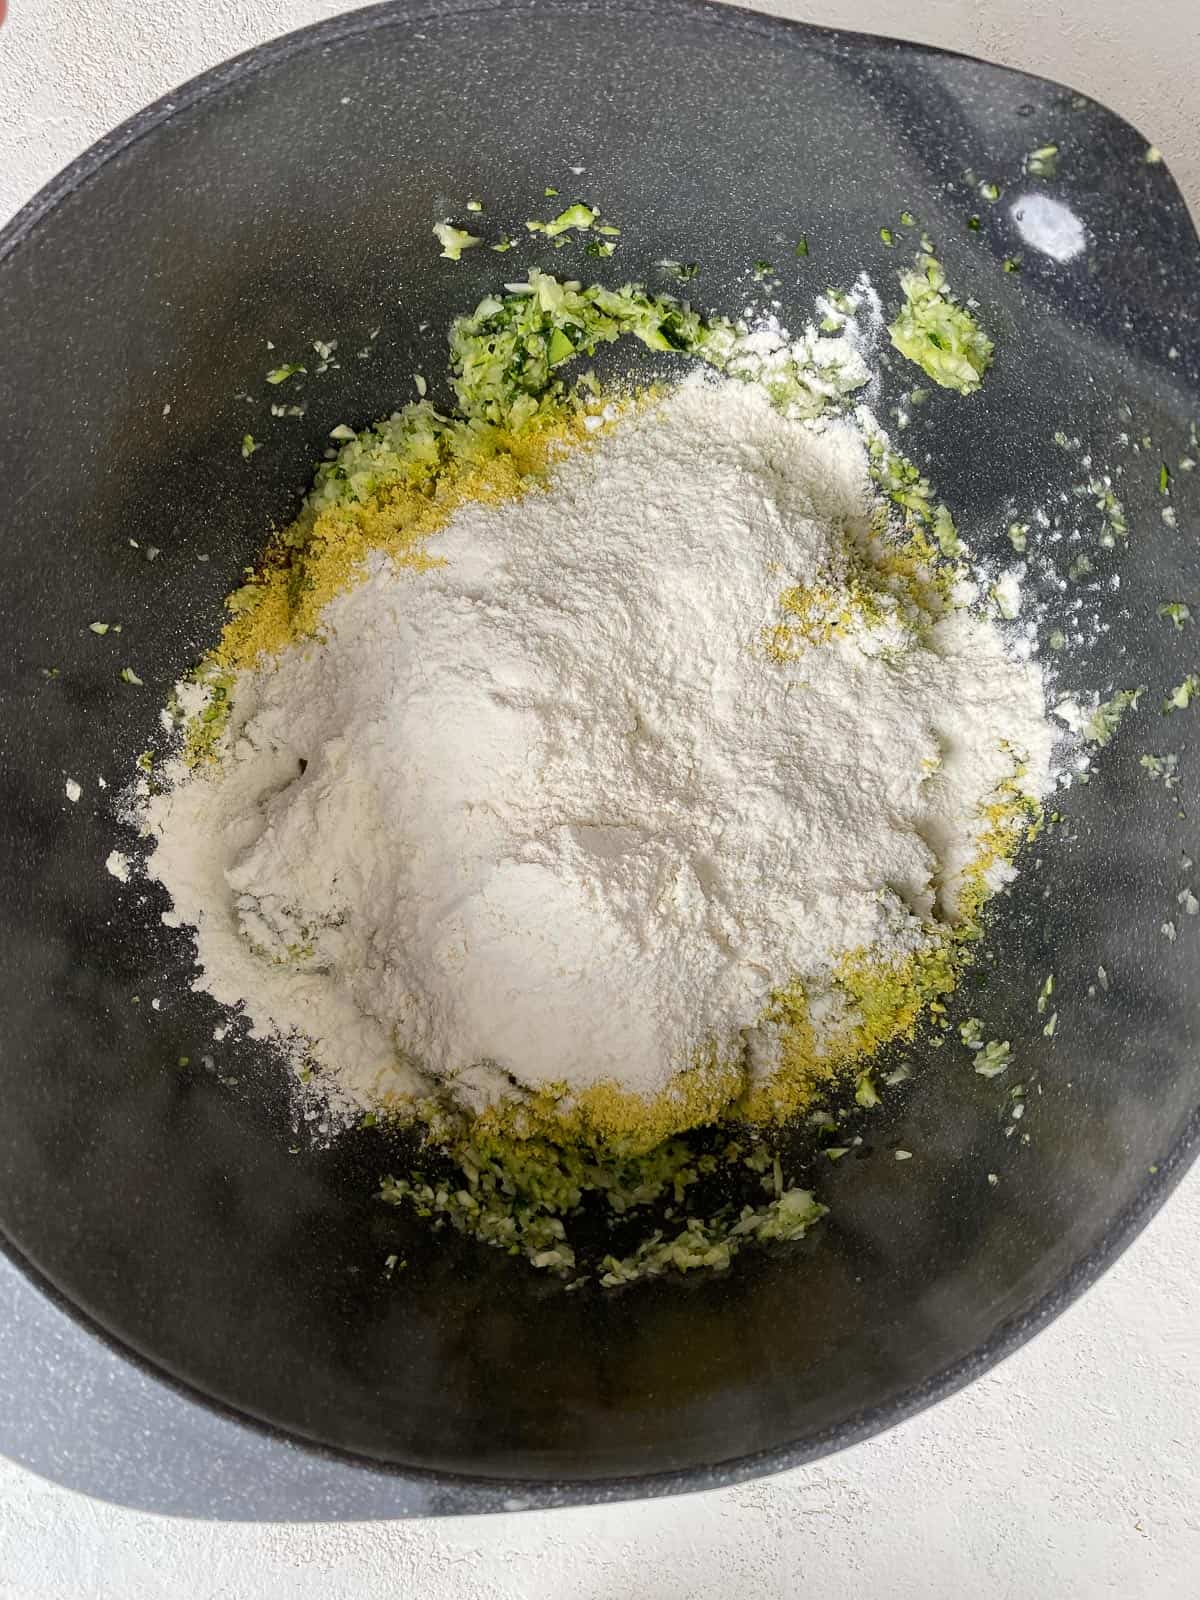 flour added to bowl of zucchini mixture